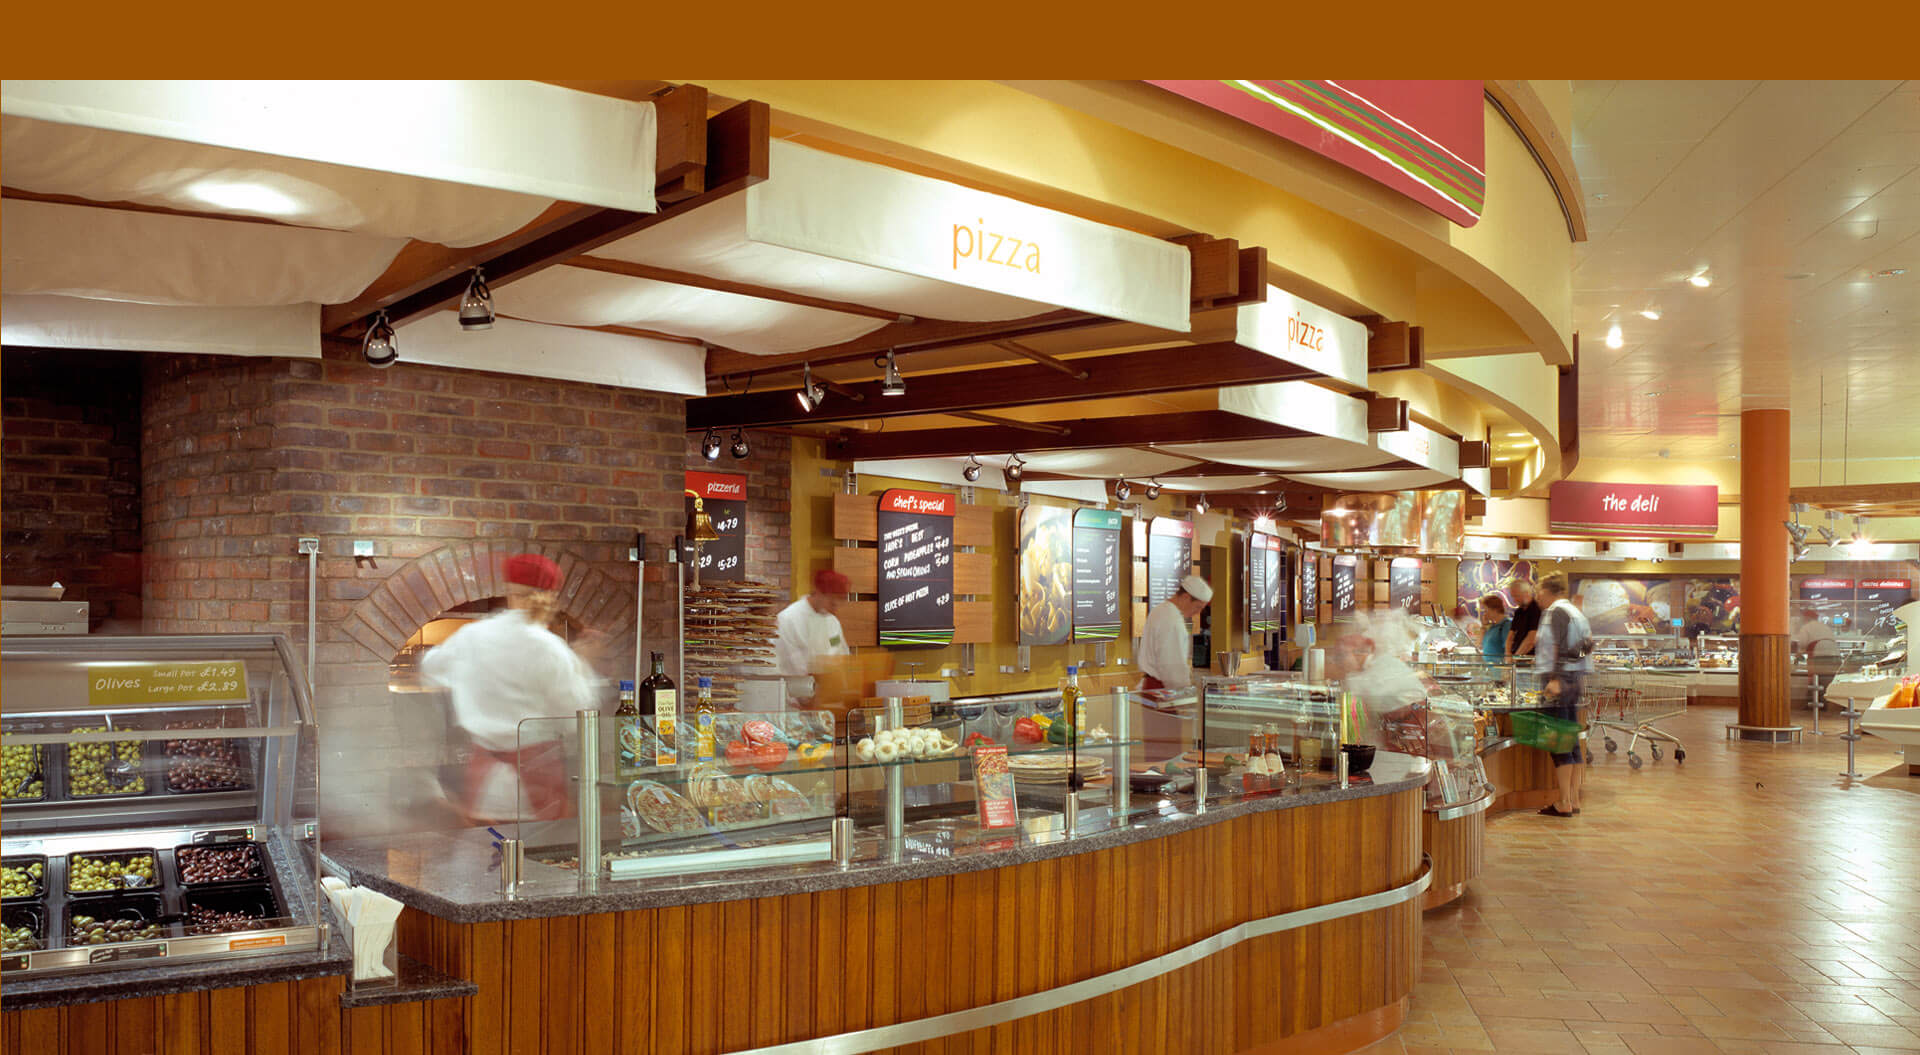 Safeway supermarket interior store design, merchandising and branding for hot food pizza and grill bar counters